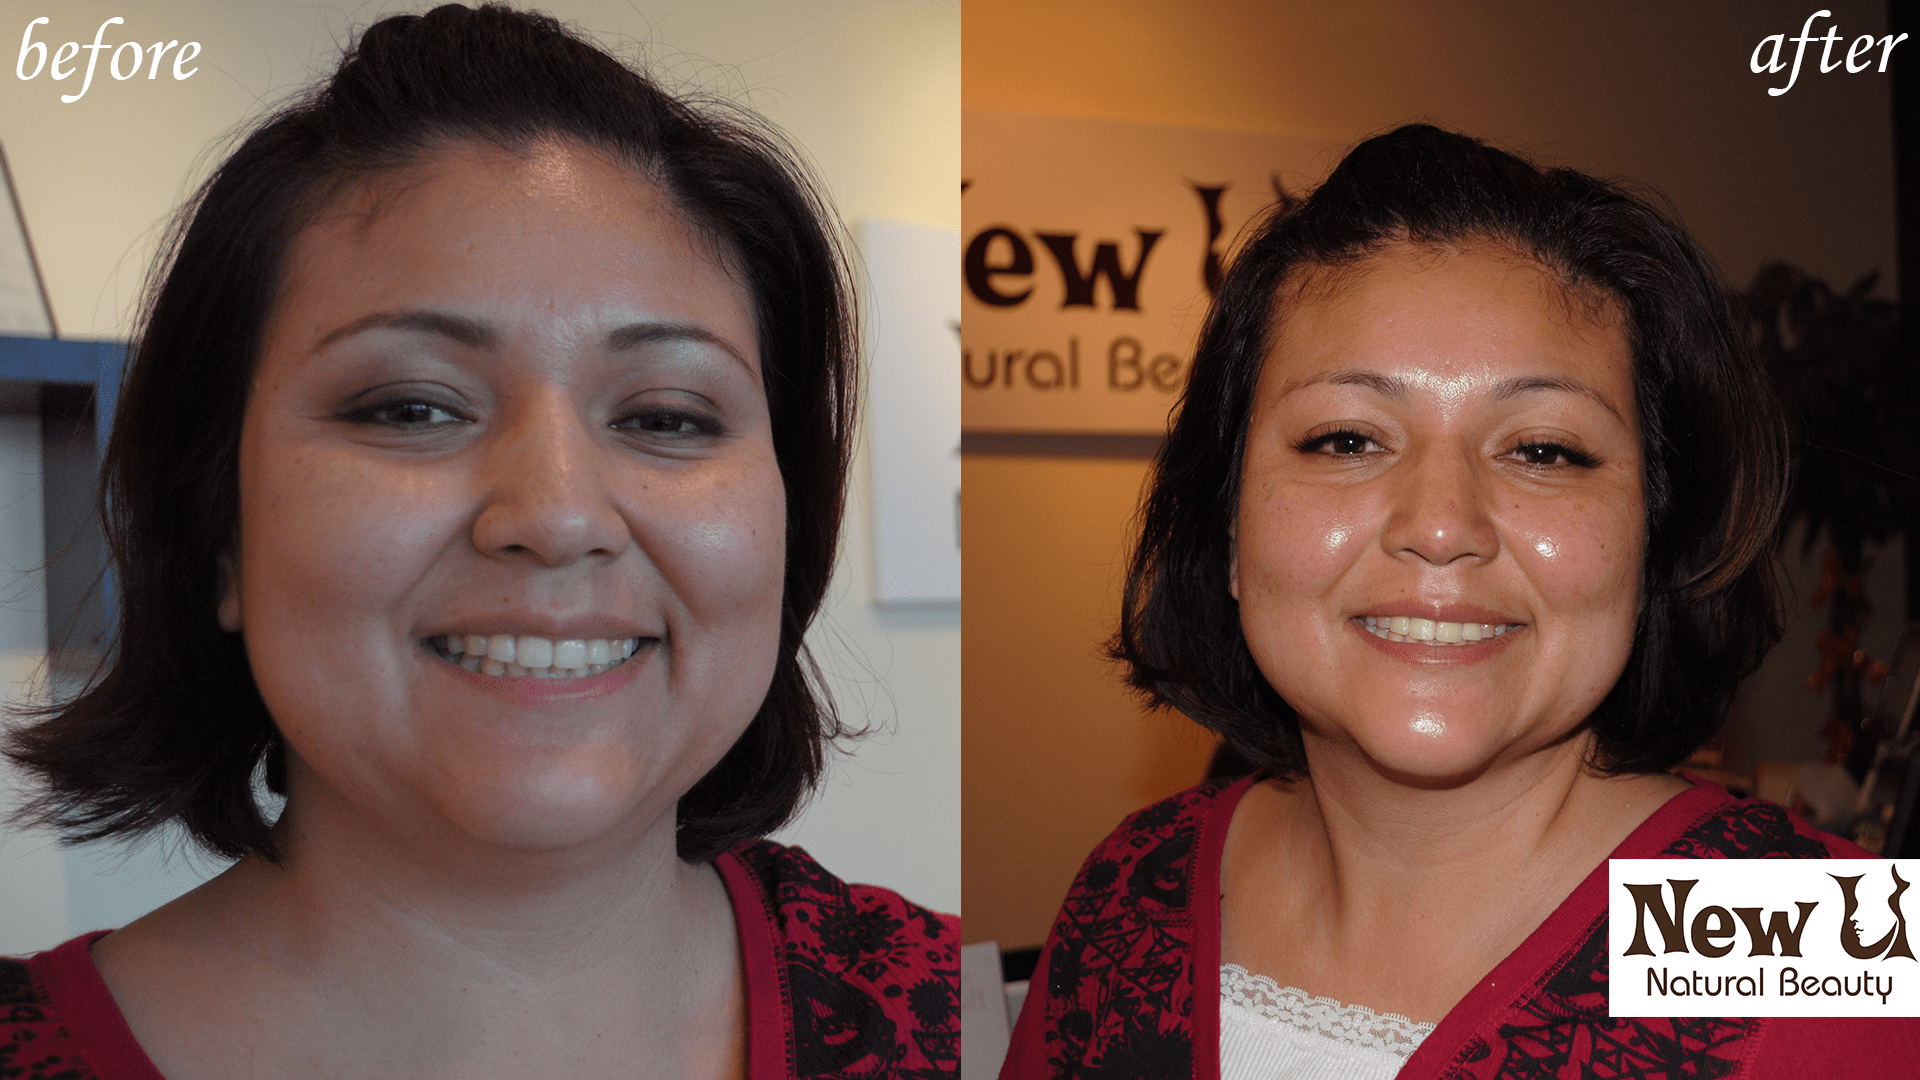 Organic Skin Care 3 Las Vegas Before and After